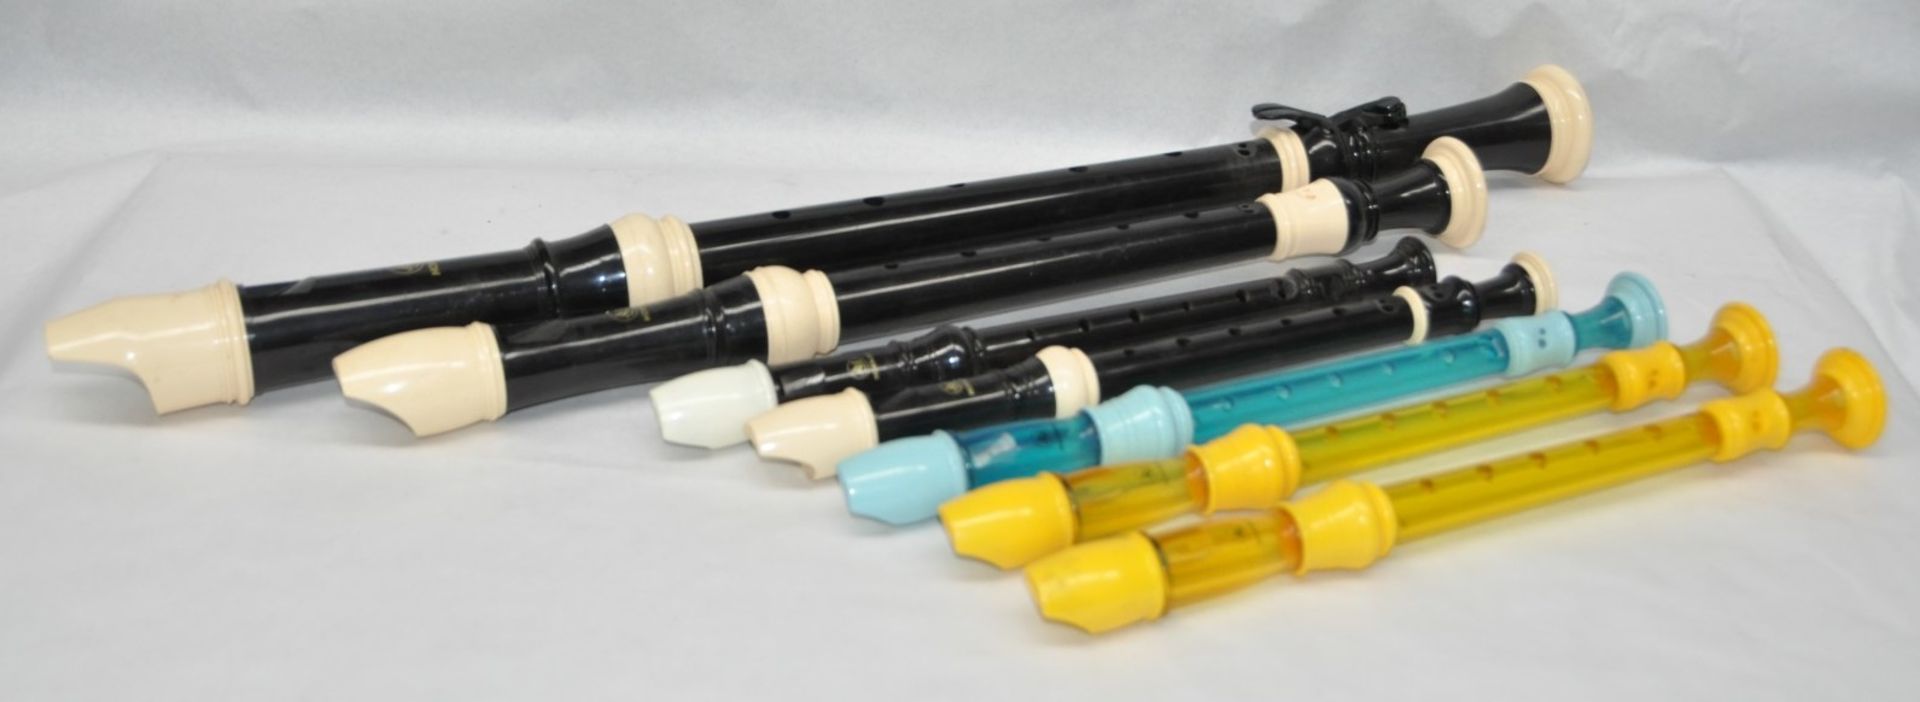 7 x Assorted Musical Flutes - Please See The Pictures Provided - CL020 - Ref Pro 51 - Location: